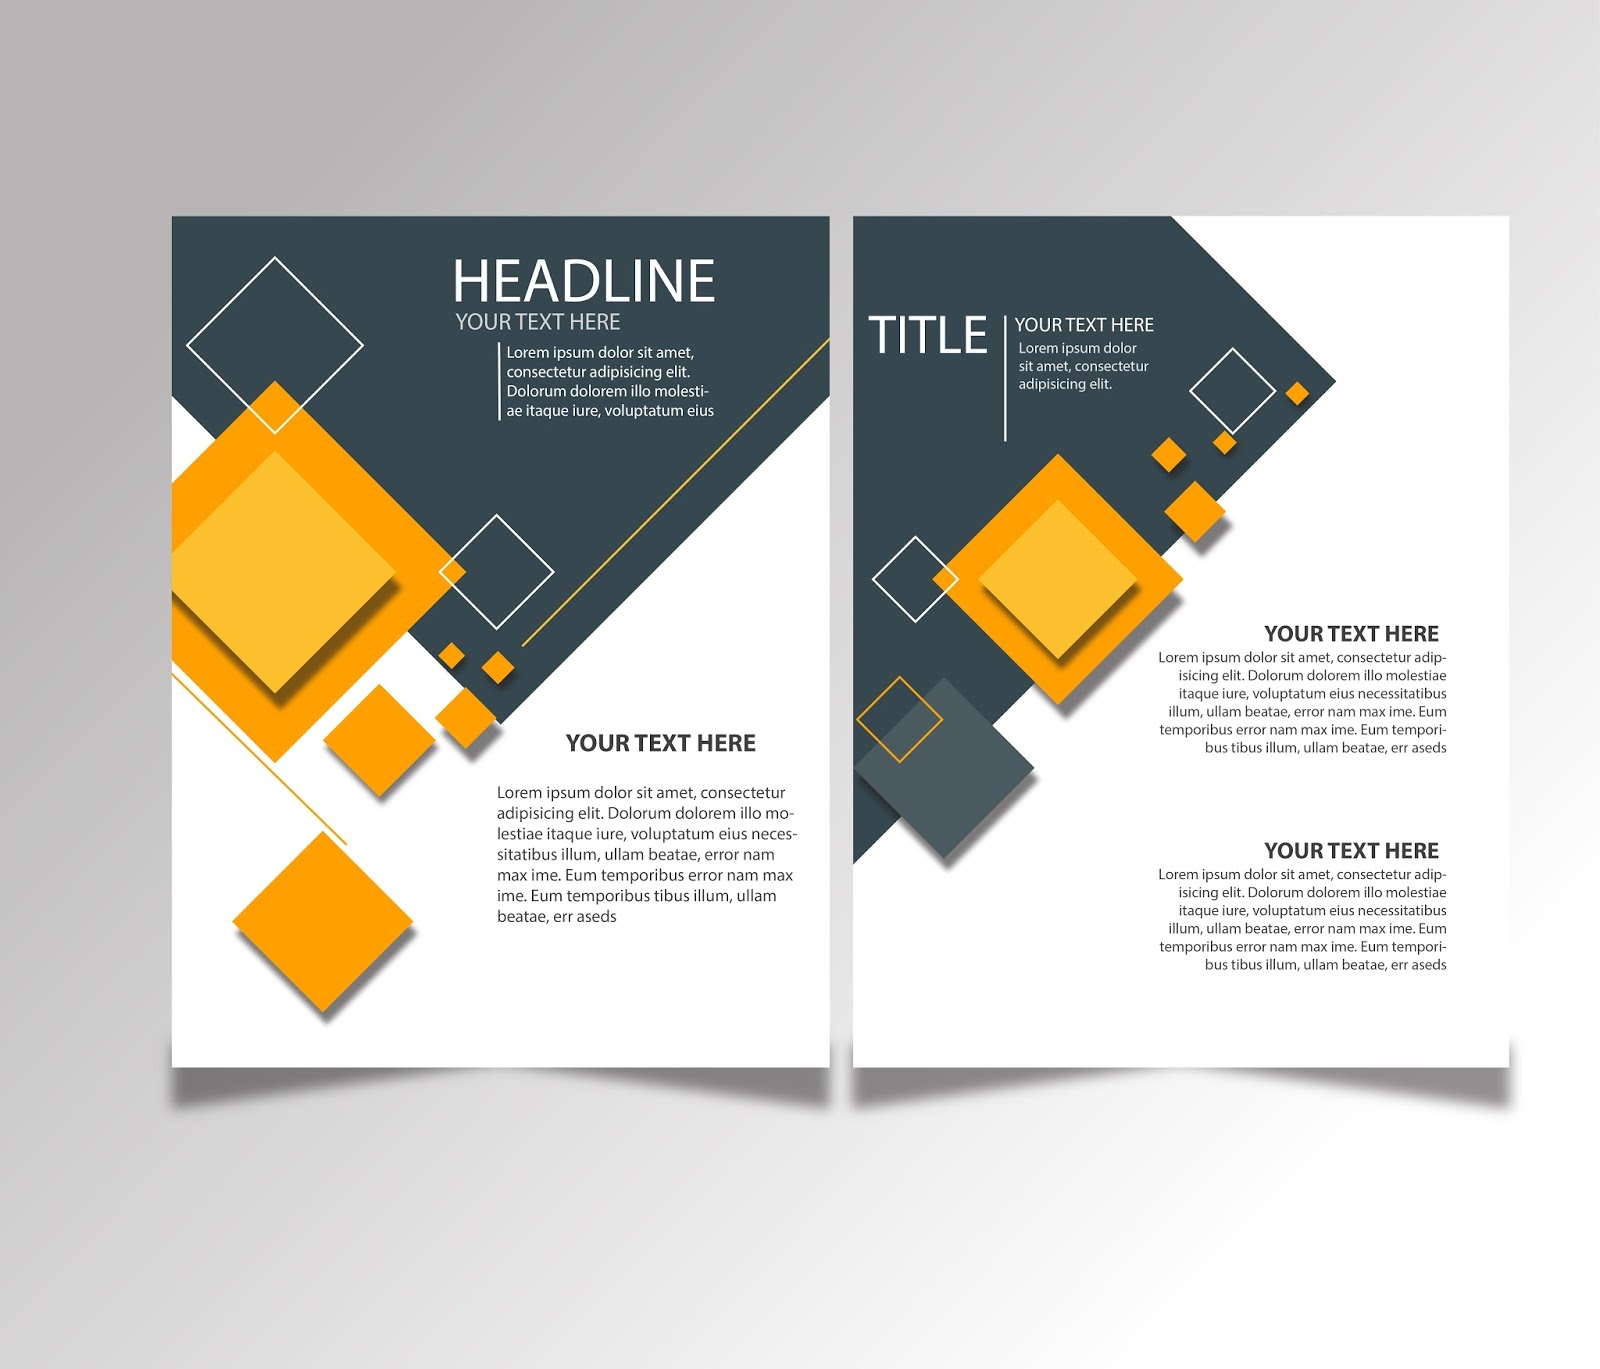 FREE DOWNLOAD BROCHURE DESIGN TEMPLATES AI FILES - Ideosprocess Pertaining To Ai Brochure Templates Free Download